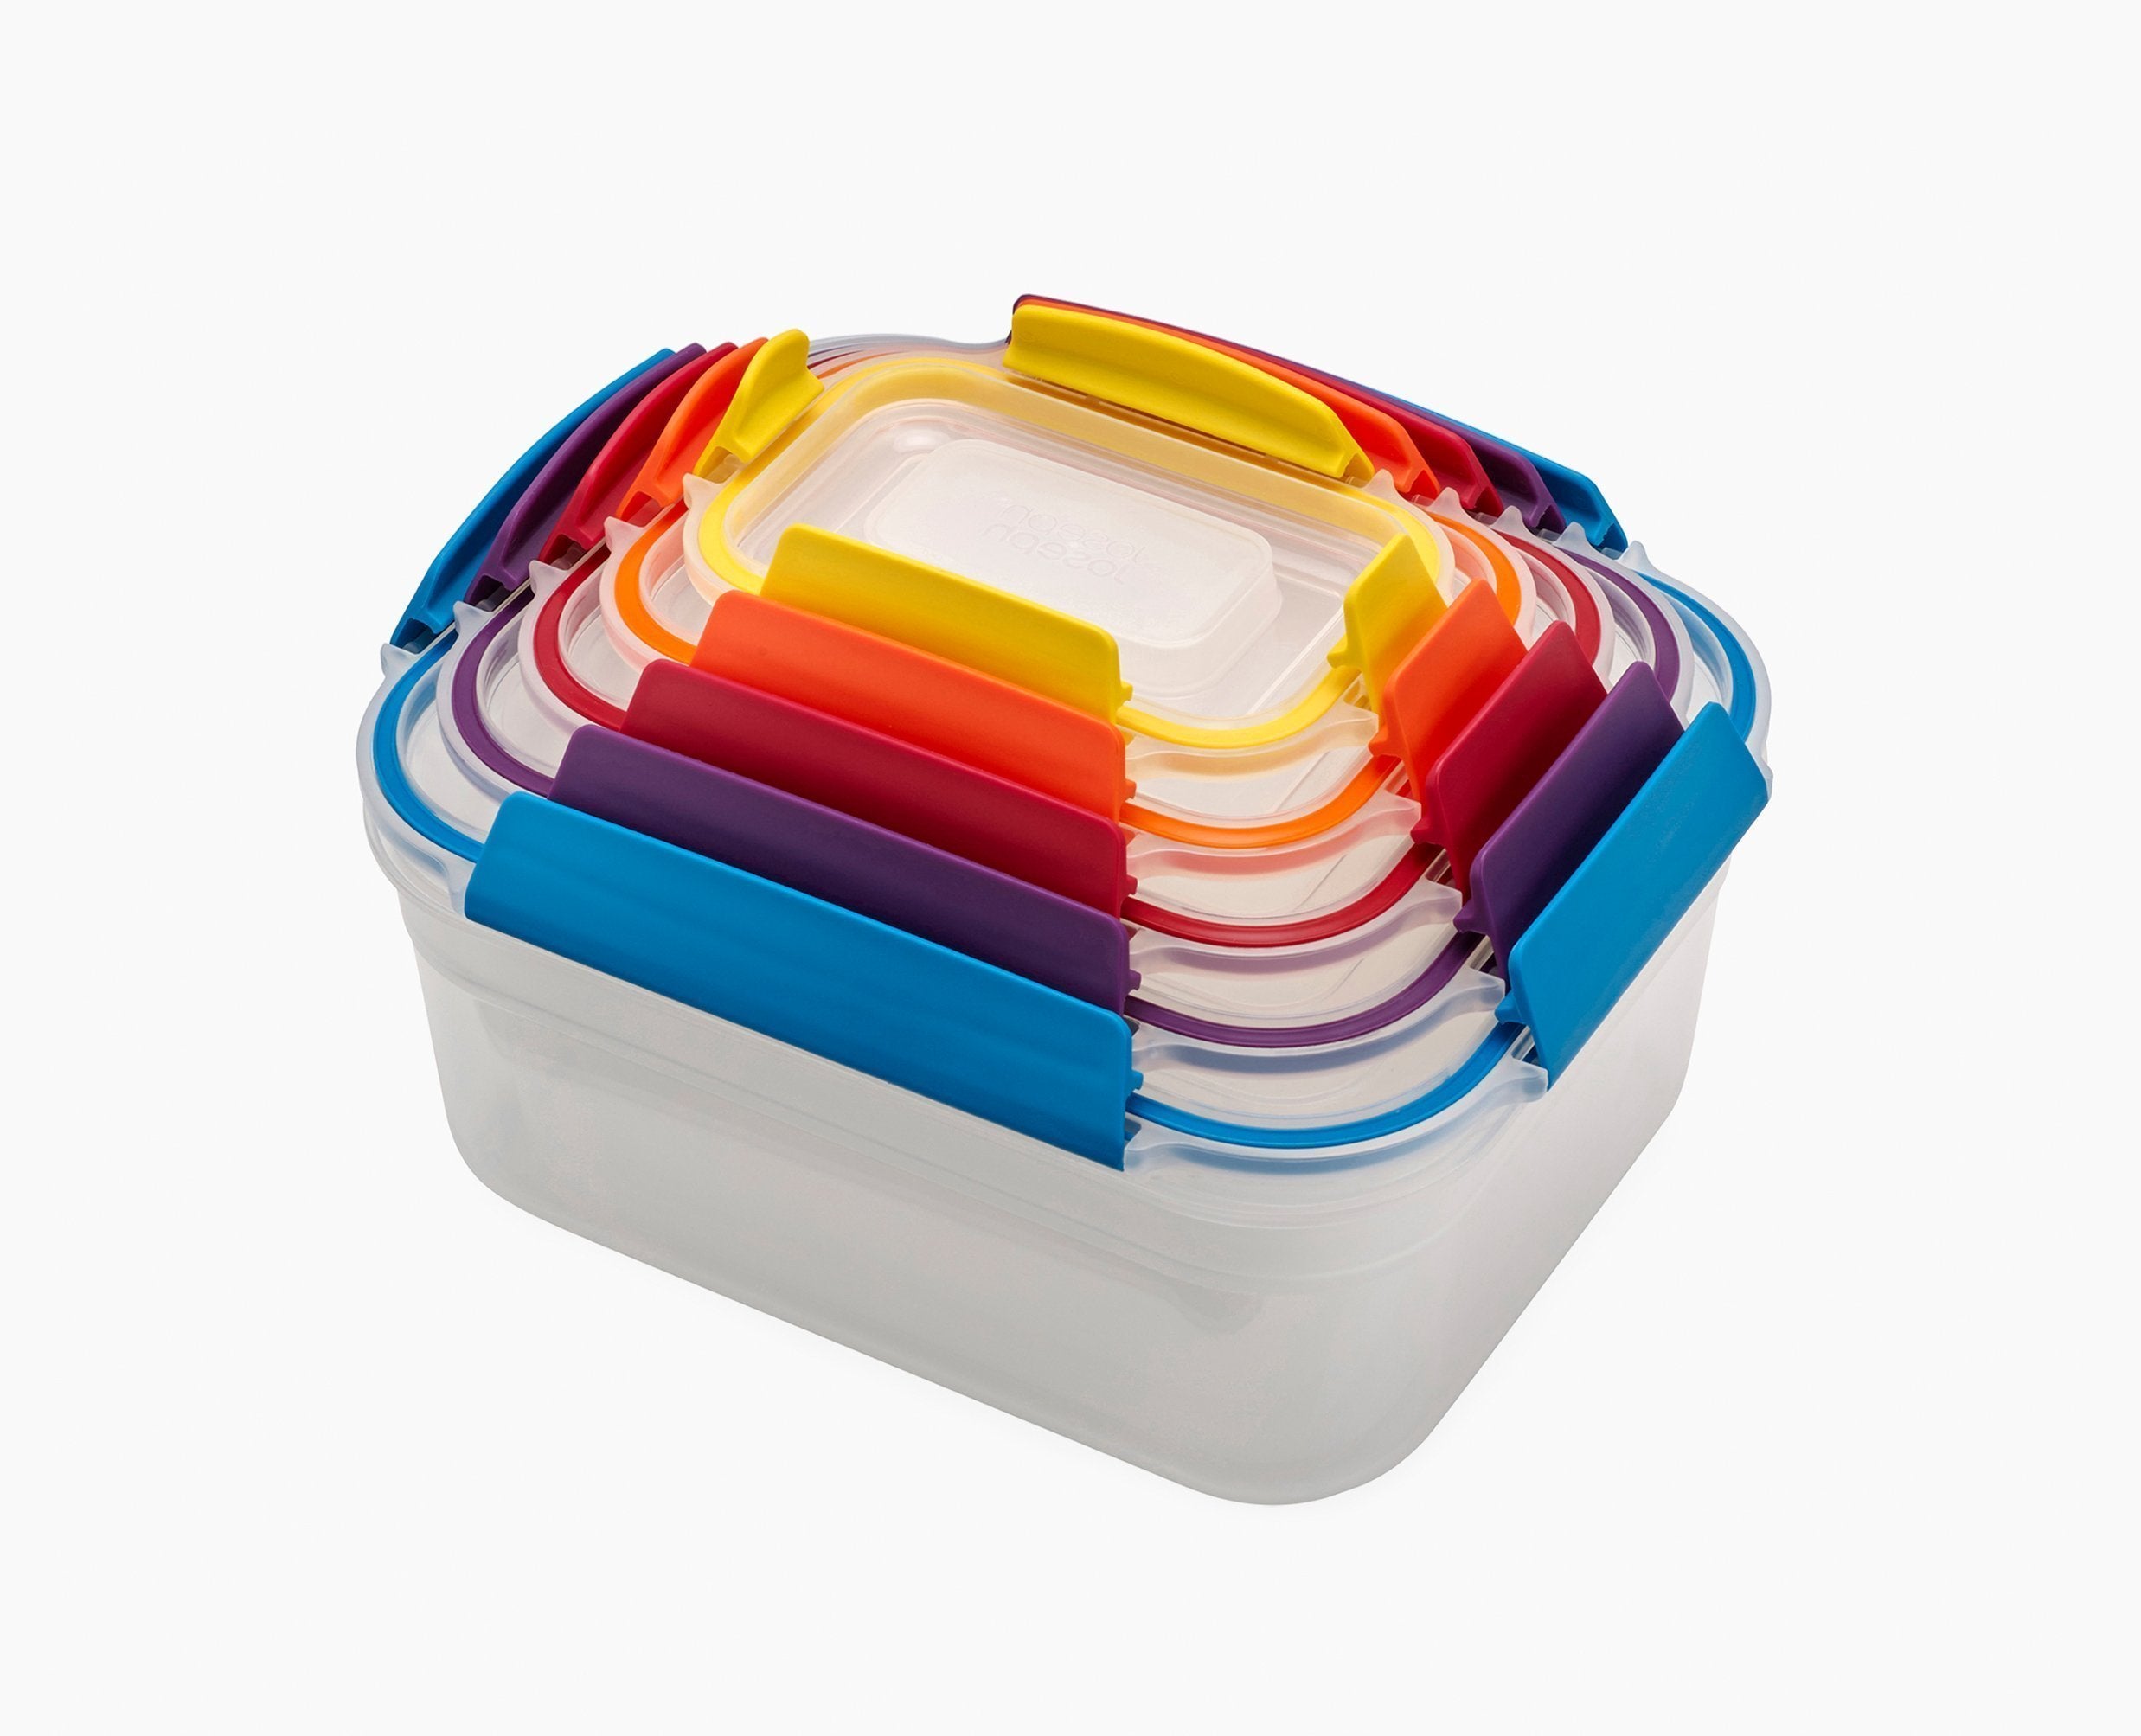 BEON.COM.AU  These leakproof food storage containers all stack neatly inside each other when not in use to take up less room in your cupboards or drawers.  Space-saving, nesting design Easy-find, snap-together lids and colour-coded bases Airtight, leakproof and stackable lids Freezer, microwave and dishwashe... Joseph Joseph at BEON.COM.AU